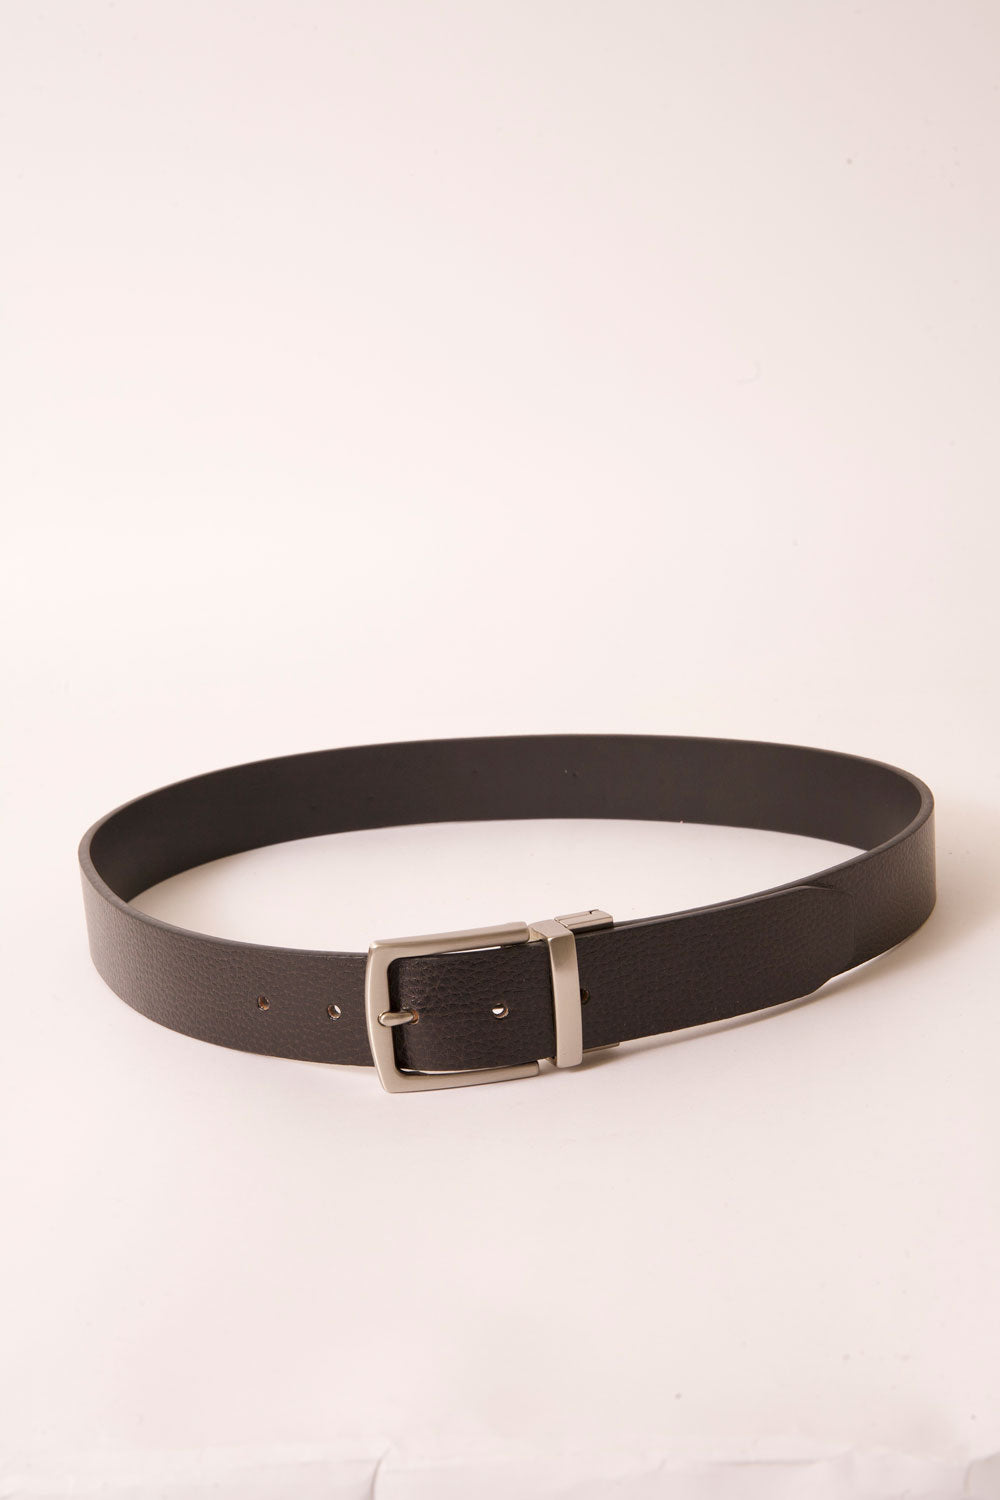 Leather Belts | Mens Leather Makers Belts American - Hat | Leather Womens Belts